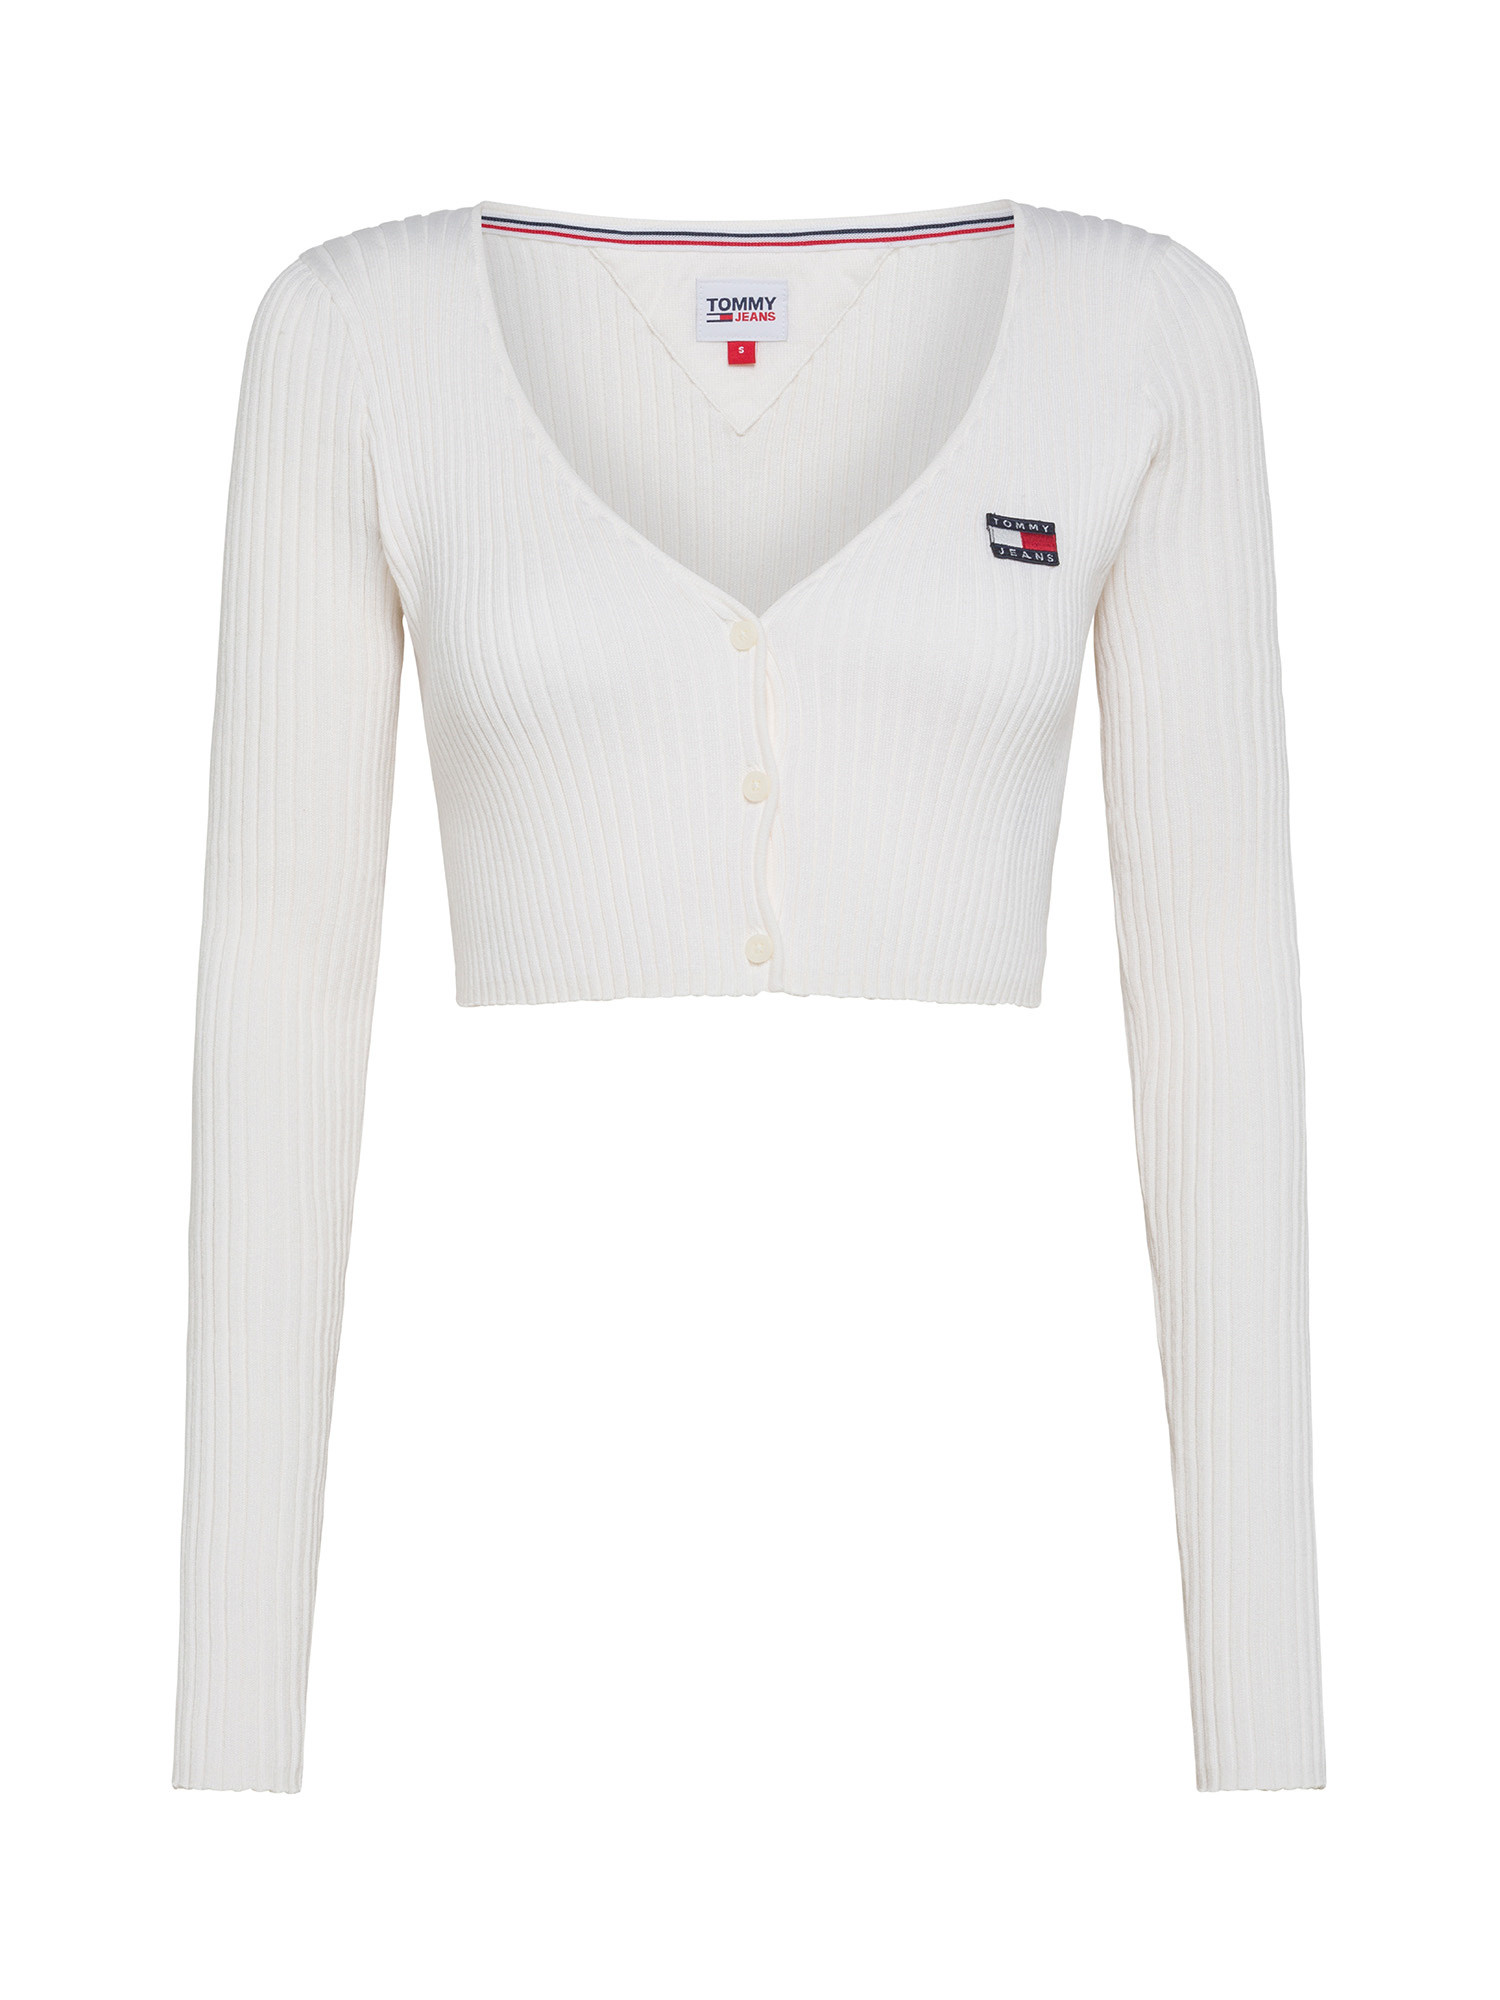 Tommy Jeans - Cardigan a costine con logo, Bianco, large image number 0